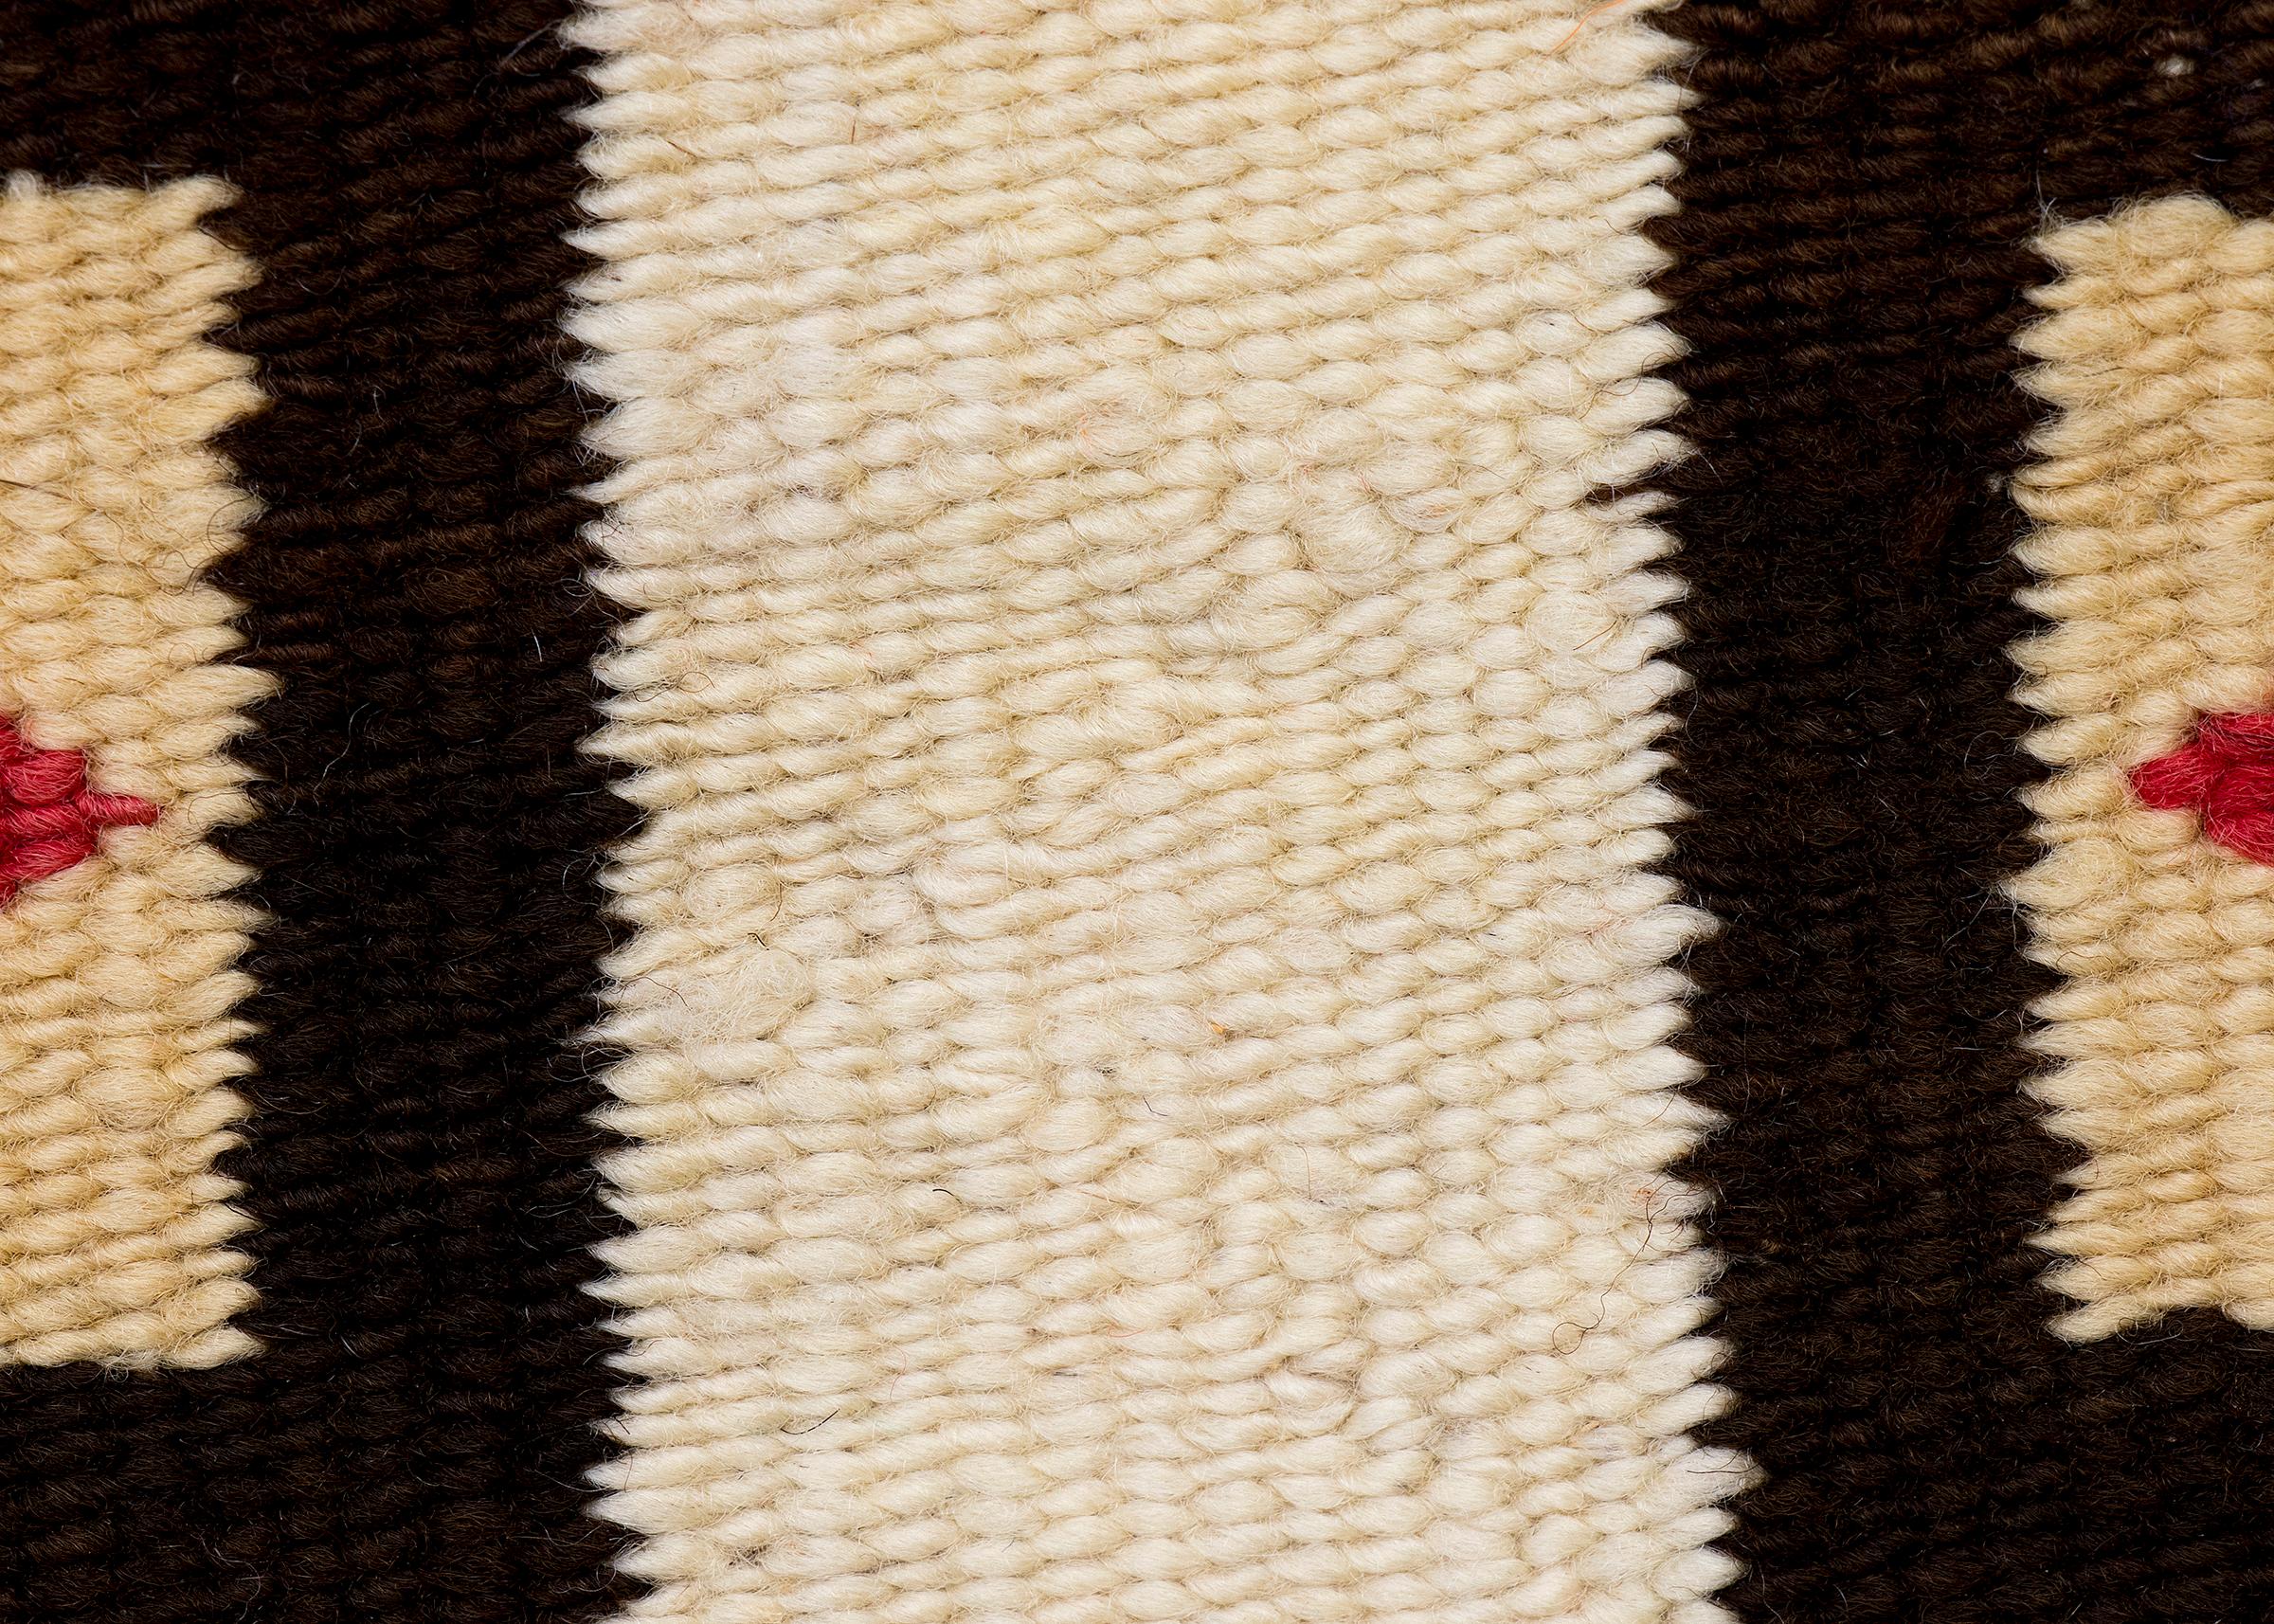 American Navajo Rug 1930s, Chinle Stripe & Diamond Pattern Ivory Camel Brown Blue Red For Sale